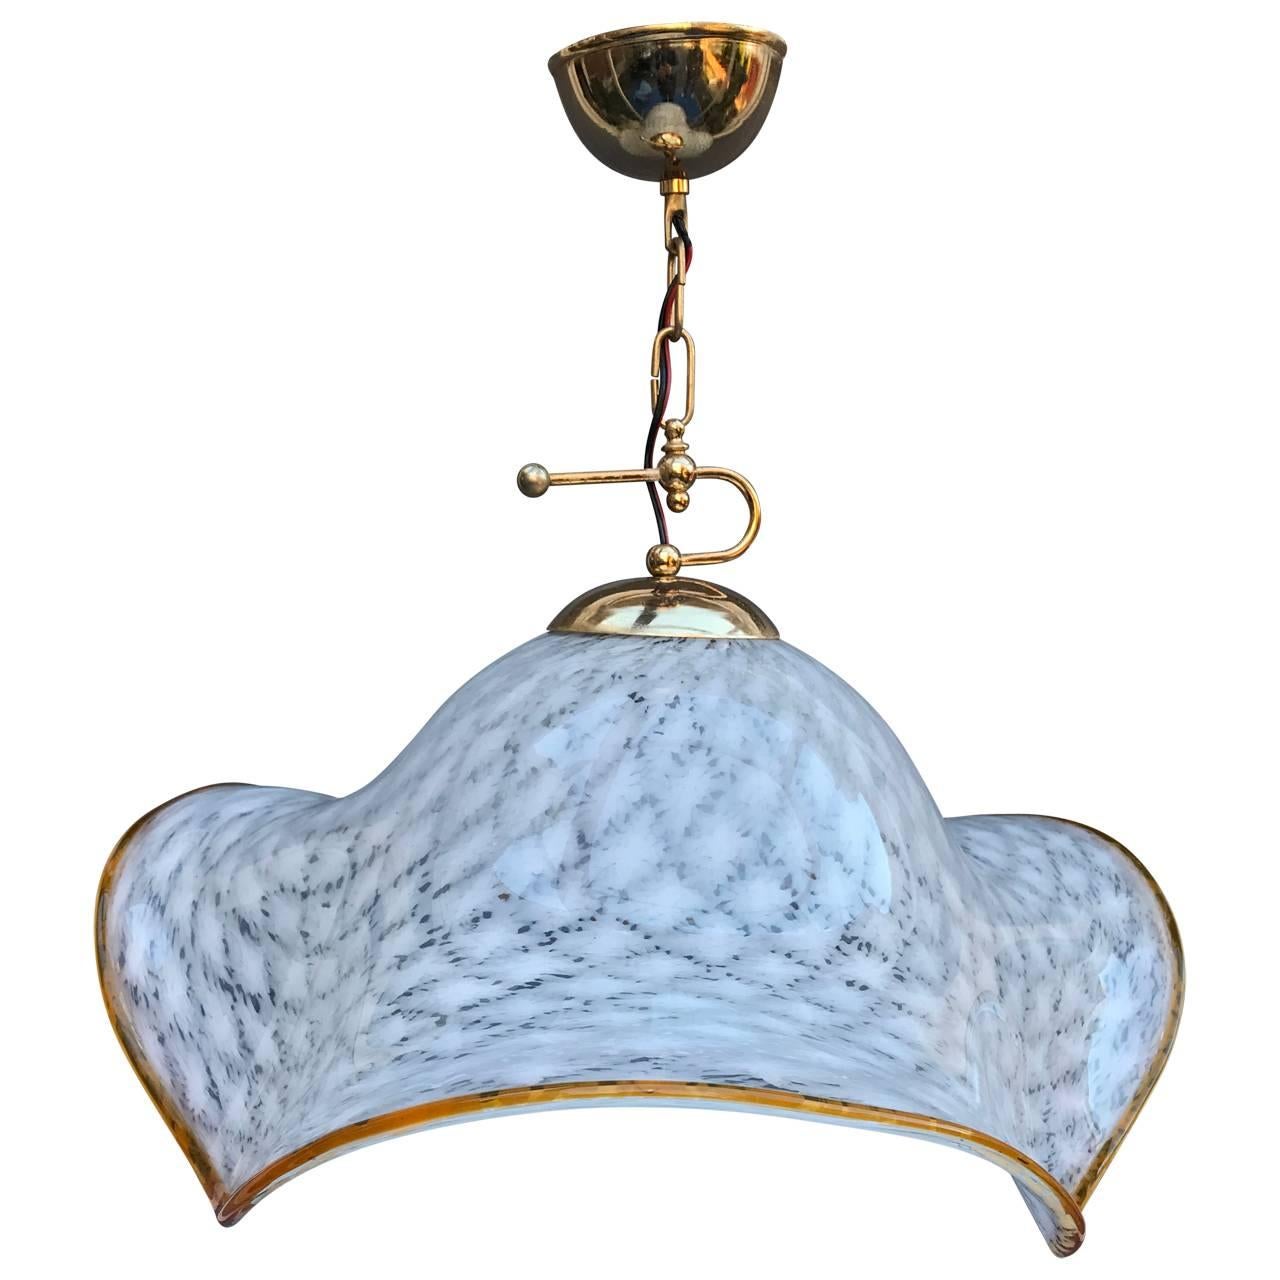 Thick Murano bell shaped and ruffled pendant with brass hardware and ceiling cover